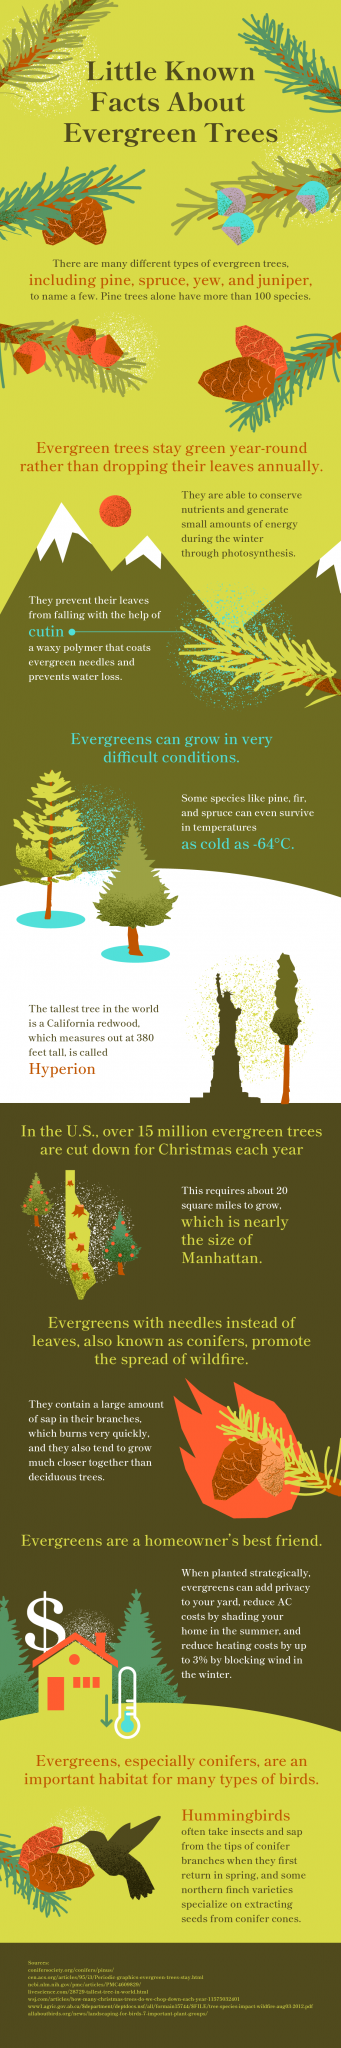 Evergreen Trees for Sale - Buying & Growing Guide - Trees.com